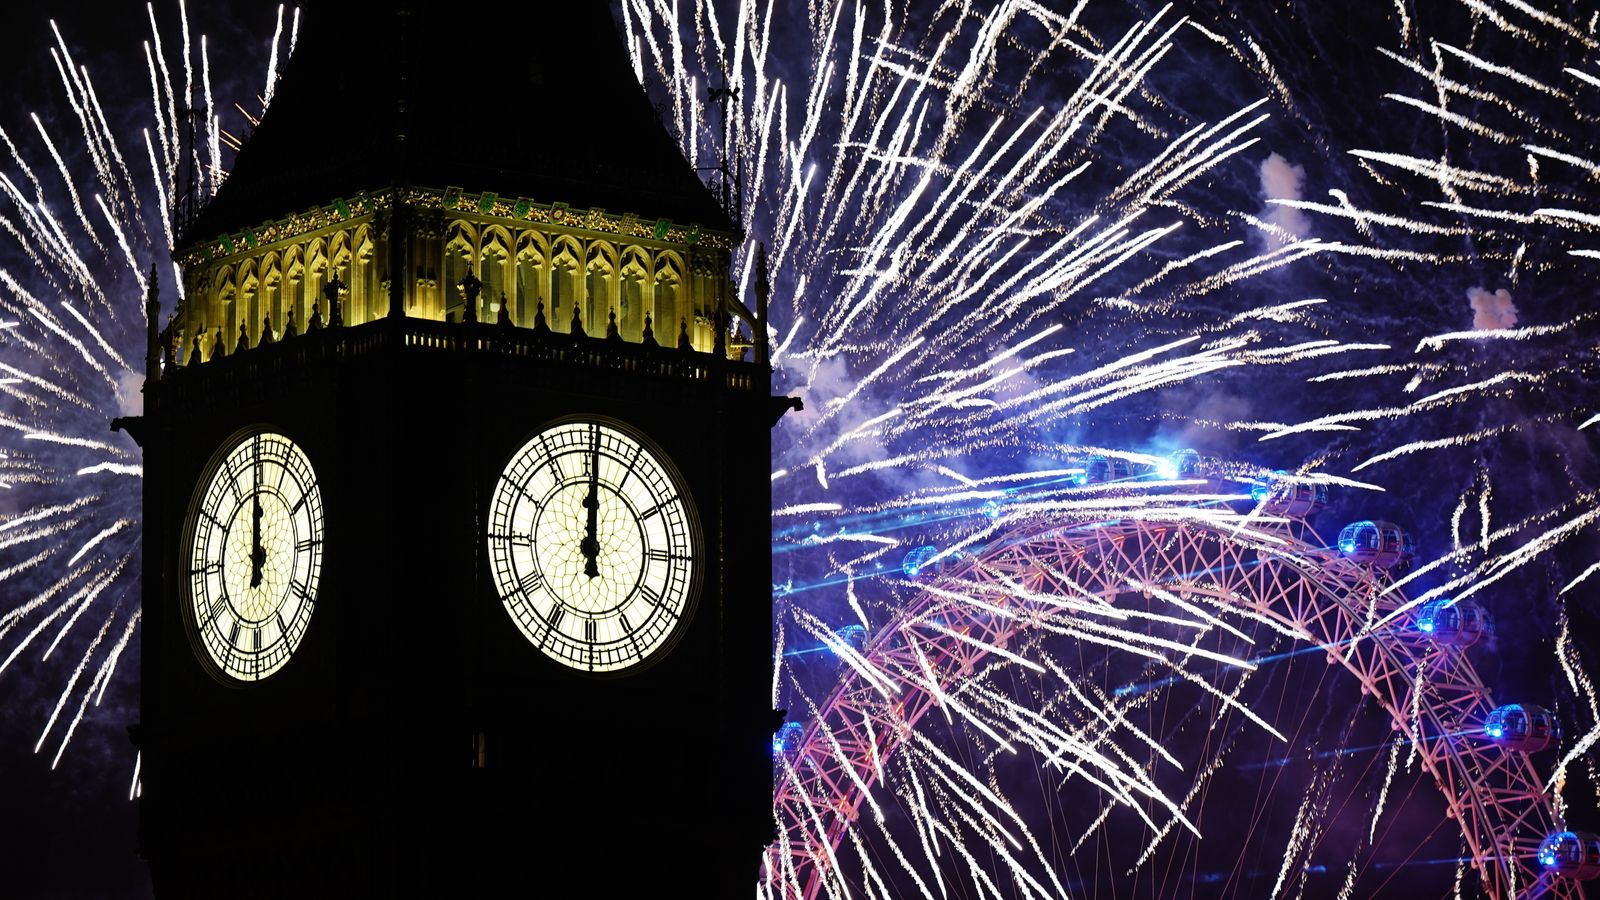 Happy New Year! UK rings in 2023 with spectacular fireworks as celebrations continue around the world